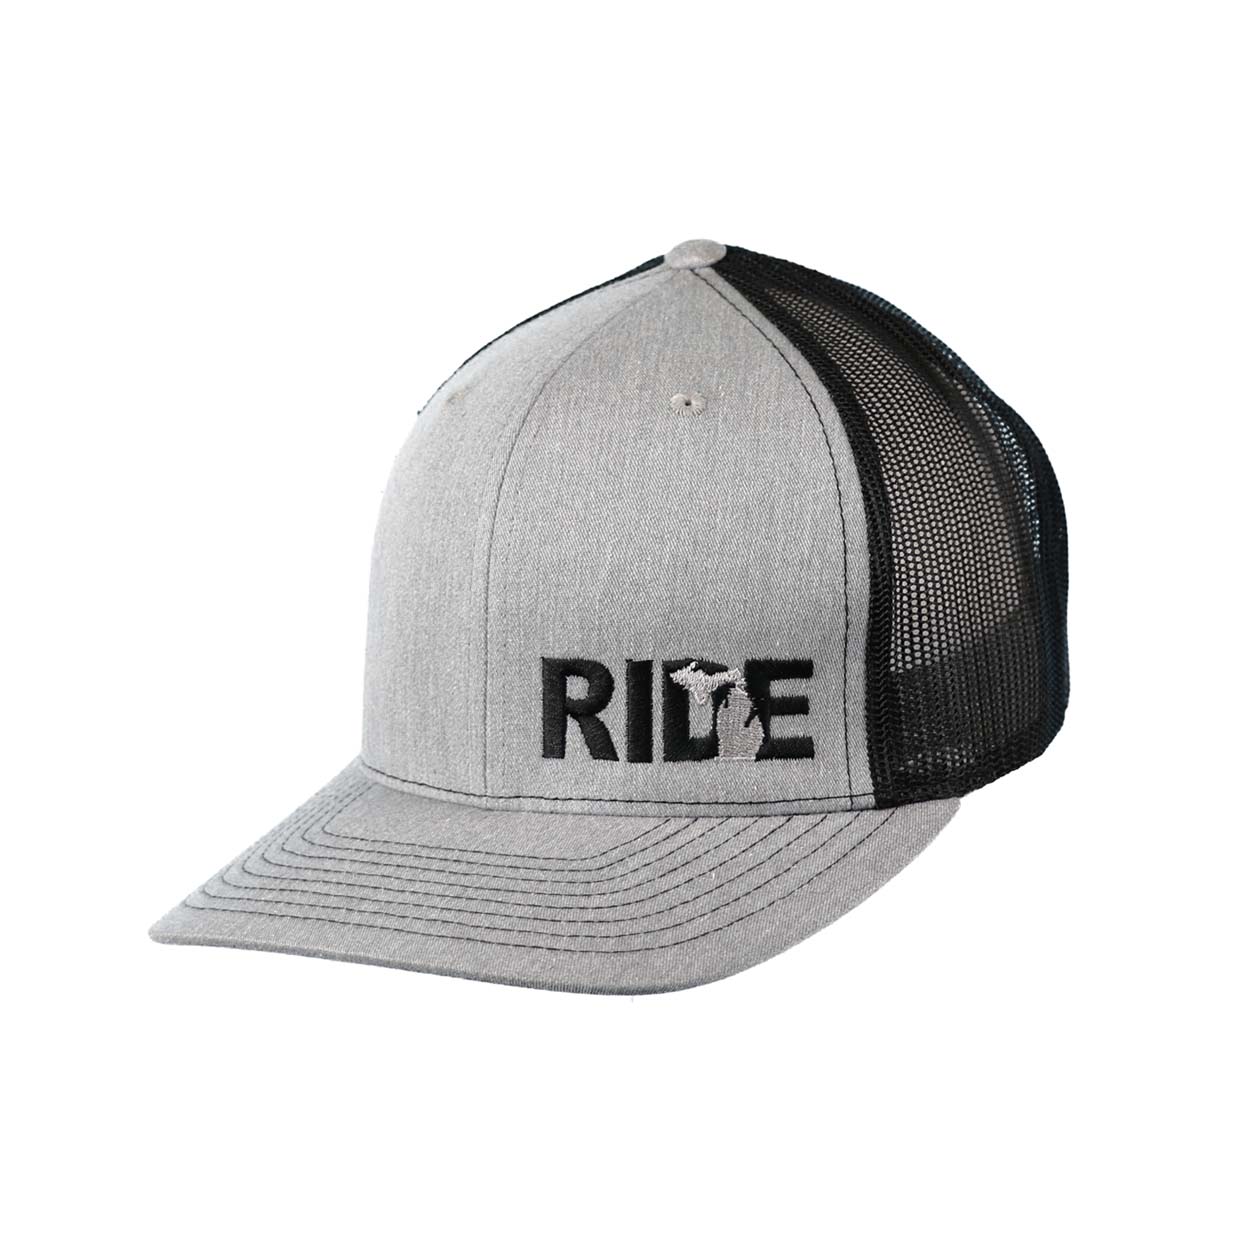 Ride Michigan Night Out Embroidered Snapback Trucker Hat Heather Gray/Black